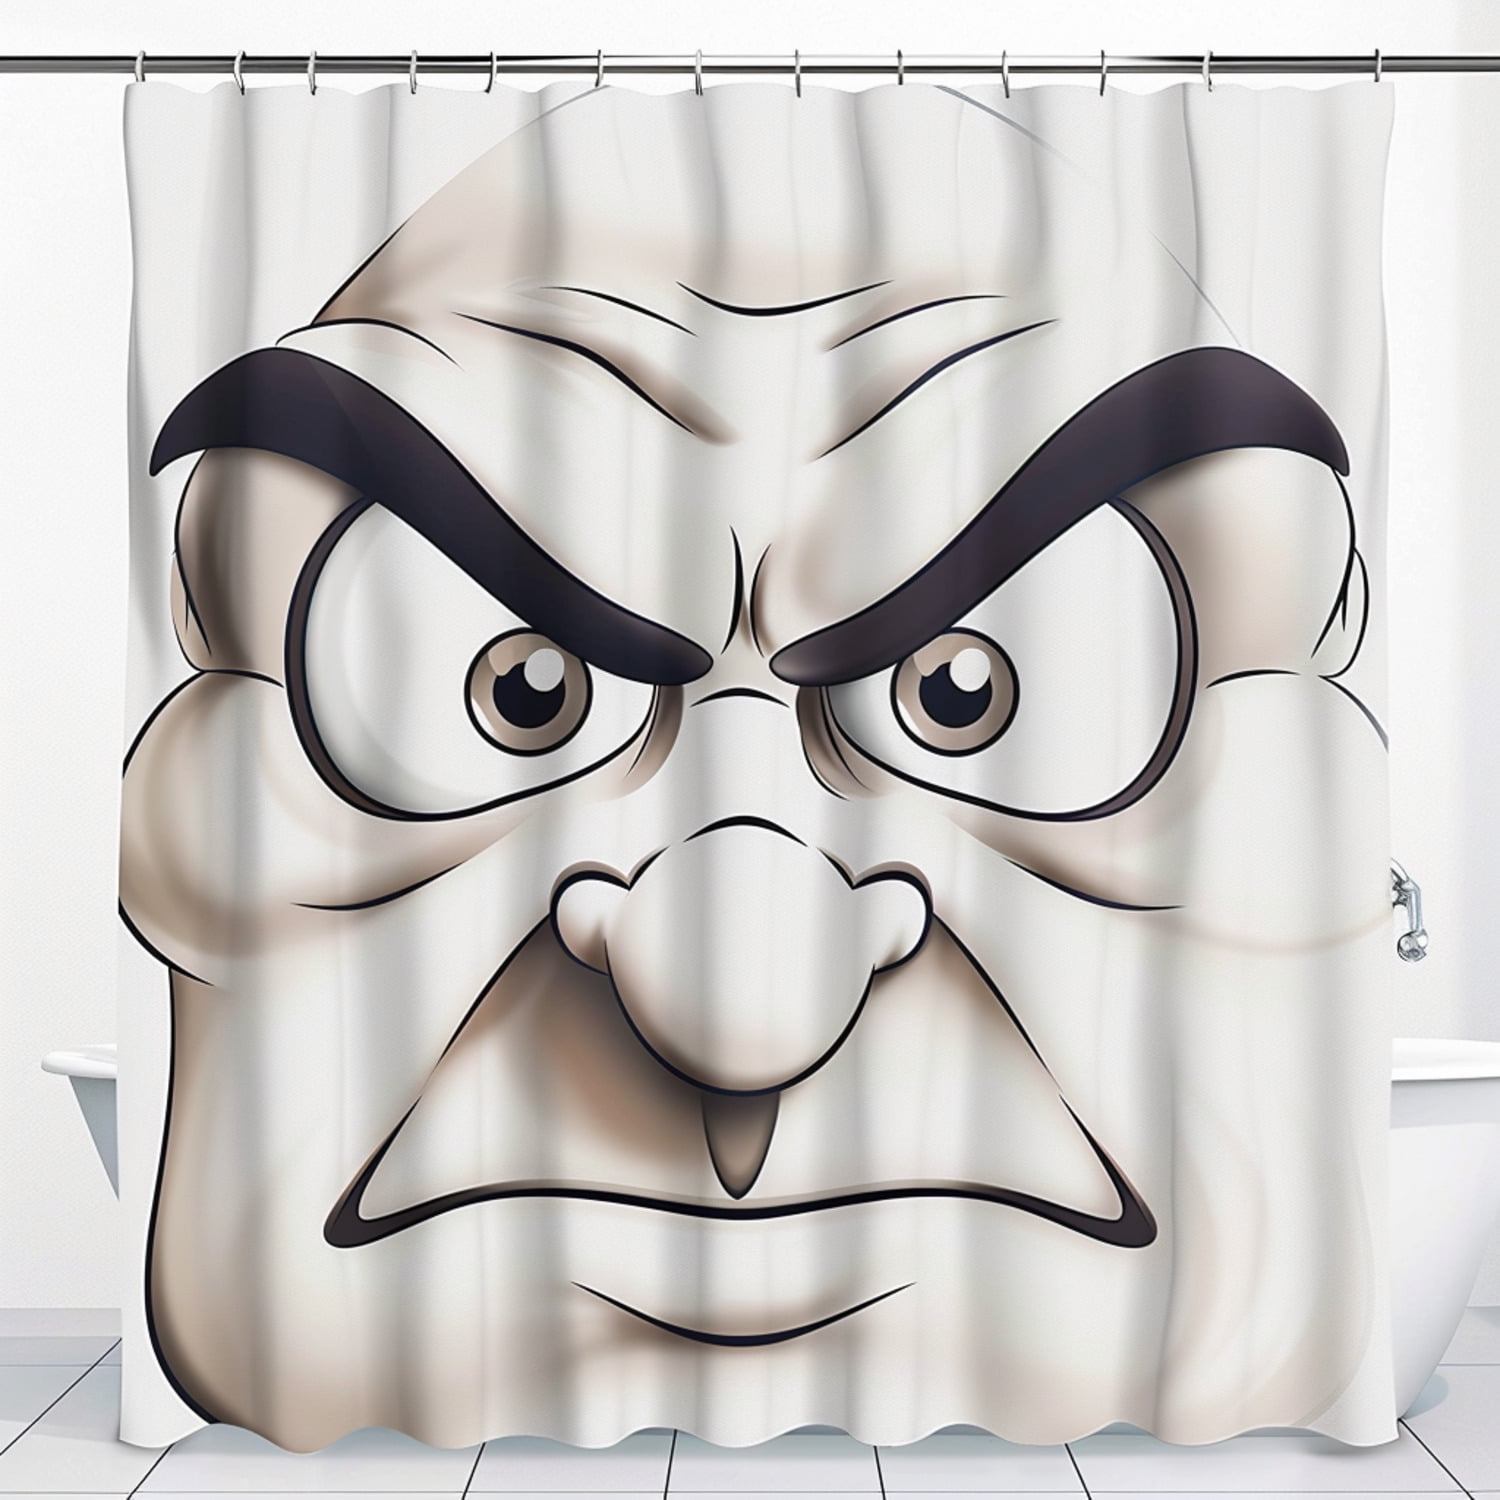 Cartoon Angry Face Shower Curtain With Big Eyes And Bald Head Design 